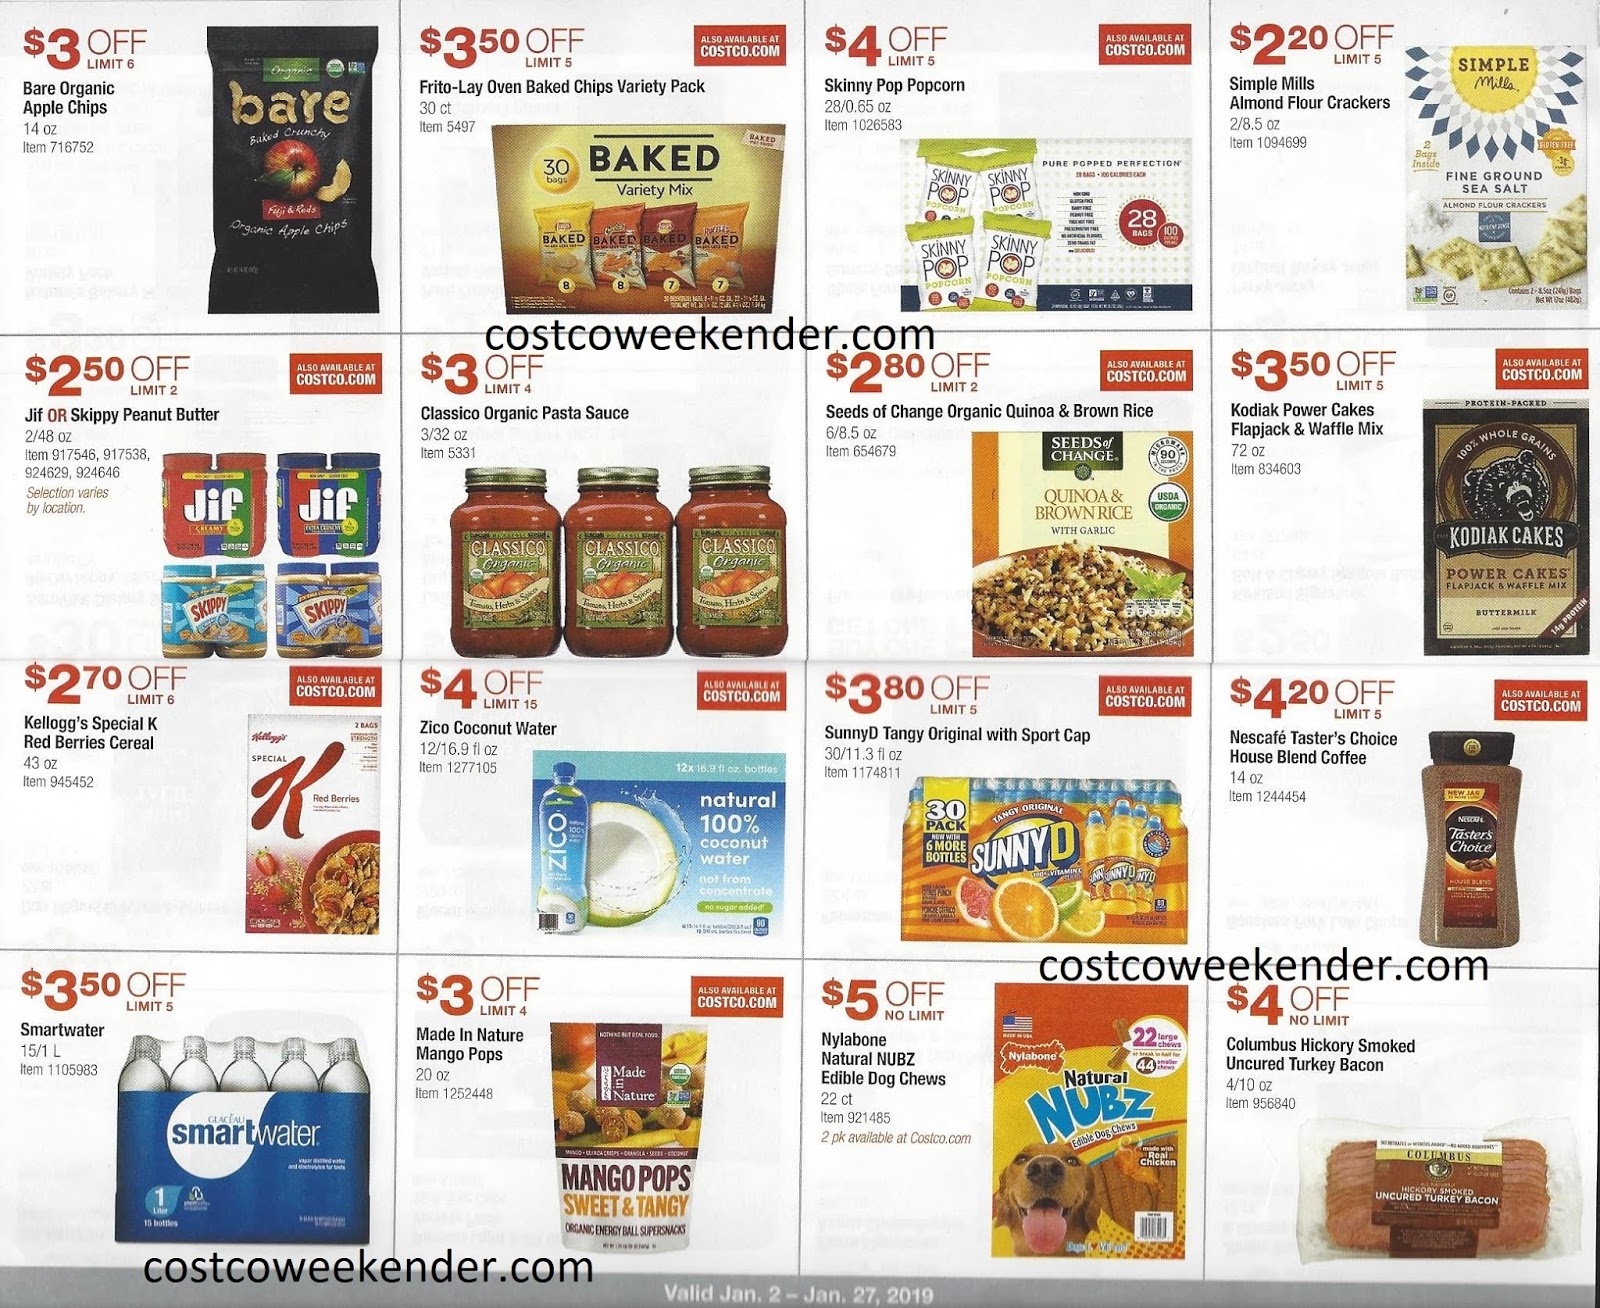 Costco January 2019 Coupon Book | Costco Weekender